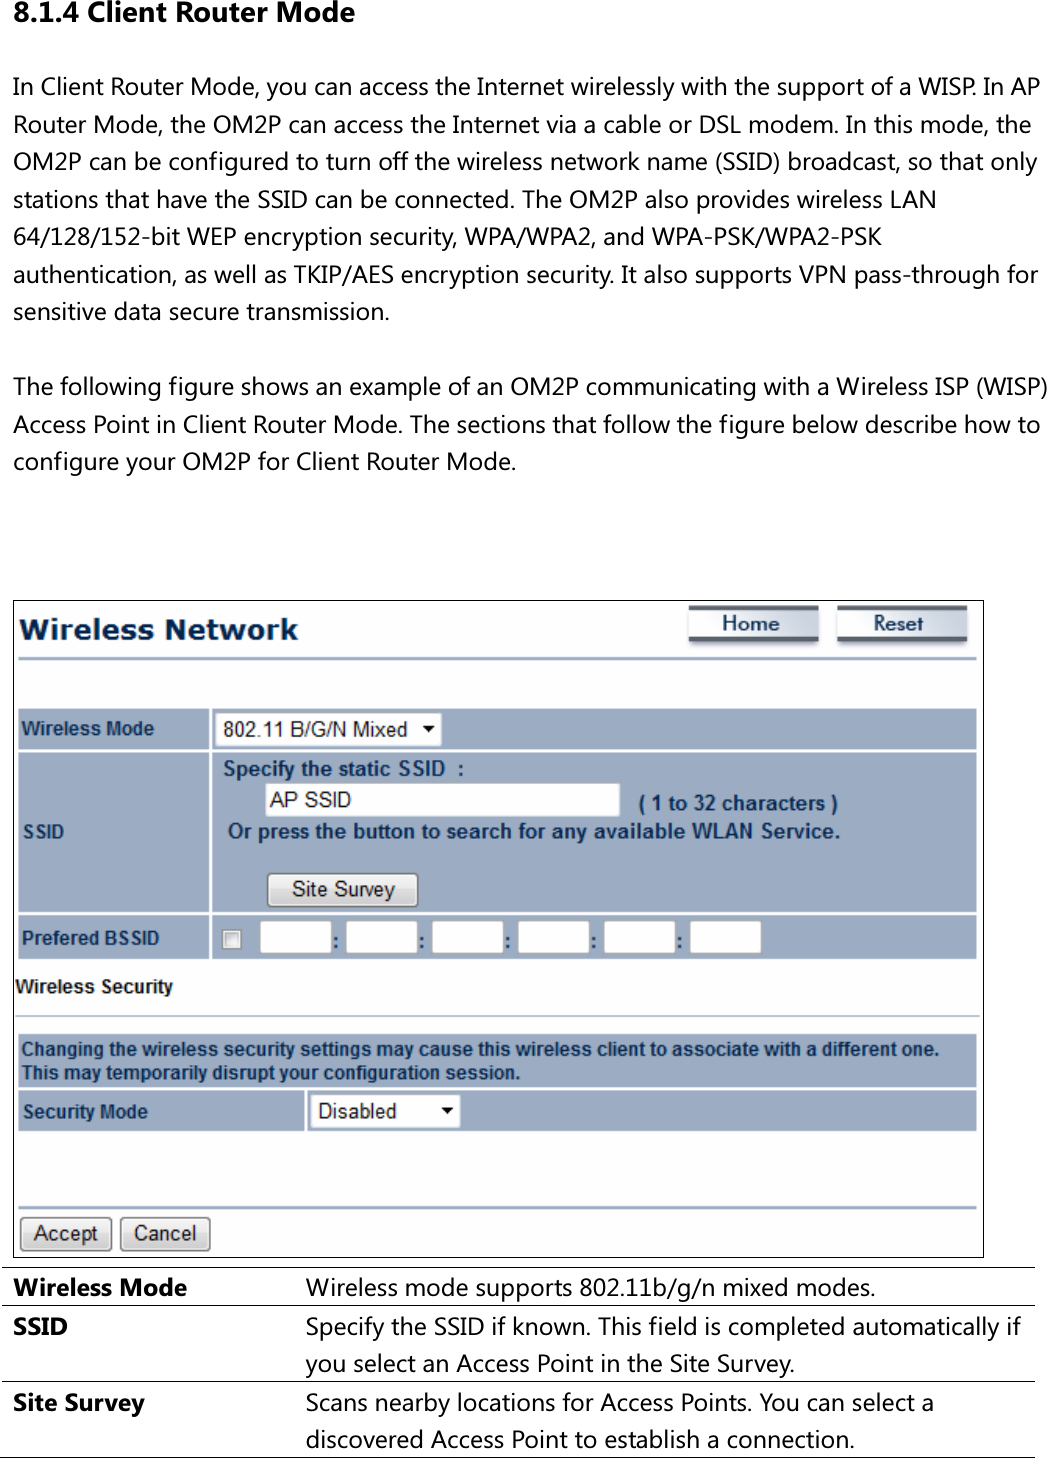 8.1.4 Client Router Mode In Client Router Mode, you can access the Internet wirelessly with the support of a WISP. In AP Router Mode, the OM2P can access the Internet via a cable or DSL modem. In this mode, the OM2P can be configured to turn off the wireless network name (SSID) broadcast, so that only stations that have the SSID can be connected. The OM2P also provides wireless LAN 64/128/152-bit WEP encryption security, WPA/WPA2, and WPA-PSK/WPA2-PSK authentication, as well as TKIP/AES encryption security. It also supports VPN pass-through for sensitive data secure transmission.  The following figure shows an example of an OM2P communicating with a Wireless ISP (WISP) Access Point in Client Router Mode. The sections that follow the figure below describe how to configure your OM2P for Client Router Mode.     Wireless Mode  Wireless mode supports 802.11b/g/n mixed modes. SSID  Specify the SSID if known. This field is completed automatically if you select an Access Point in the Site Survey. Site Survey  Scans nearby locations for Access Points. You can select a discovered Access Point to establish a connection. 